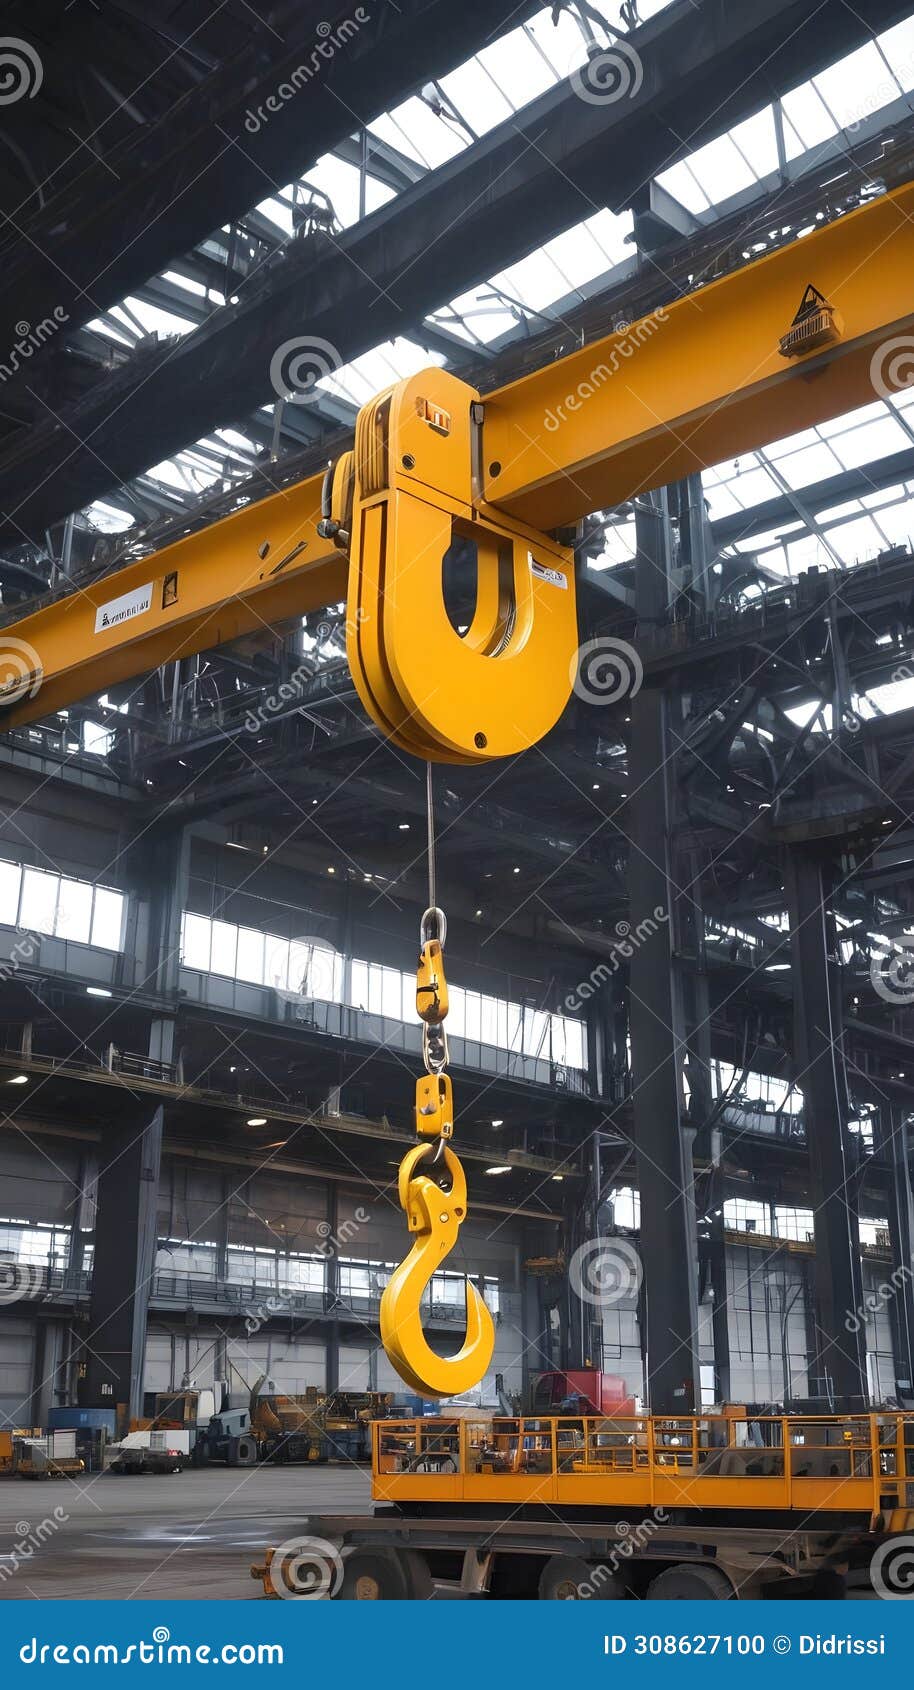 an immense overhead crane hook suspended in midair at a bustling industrial location